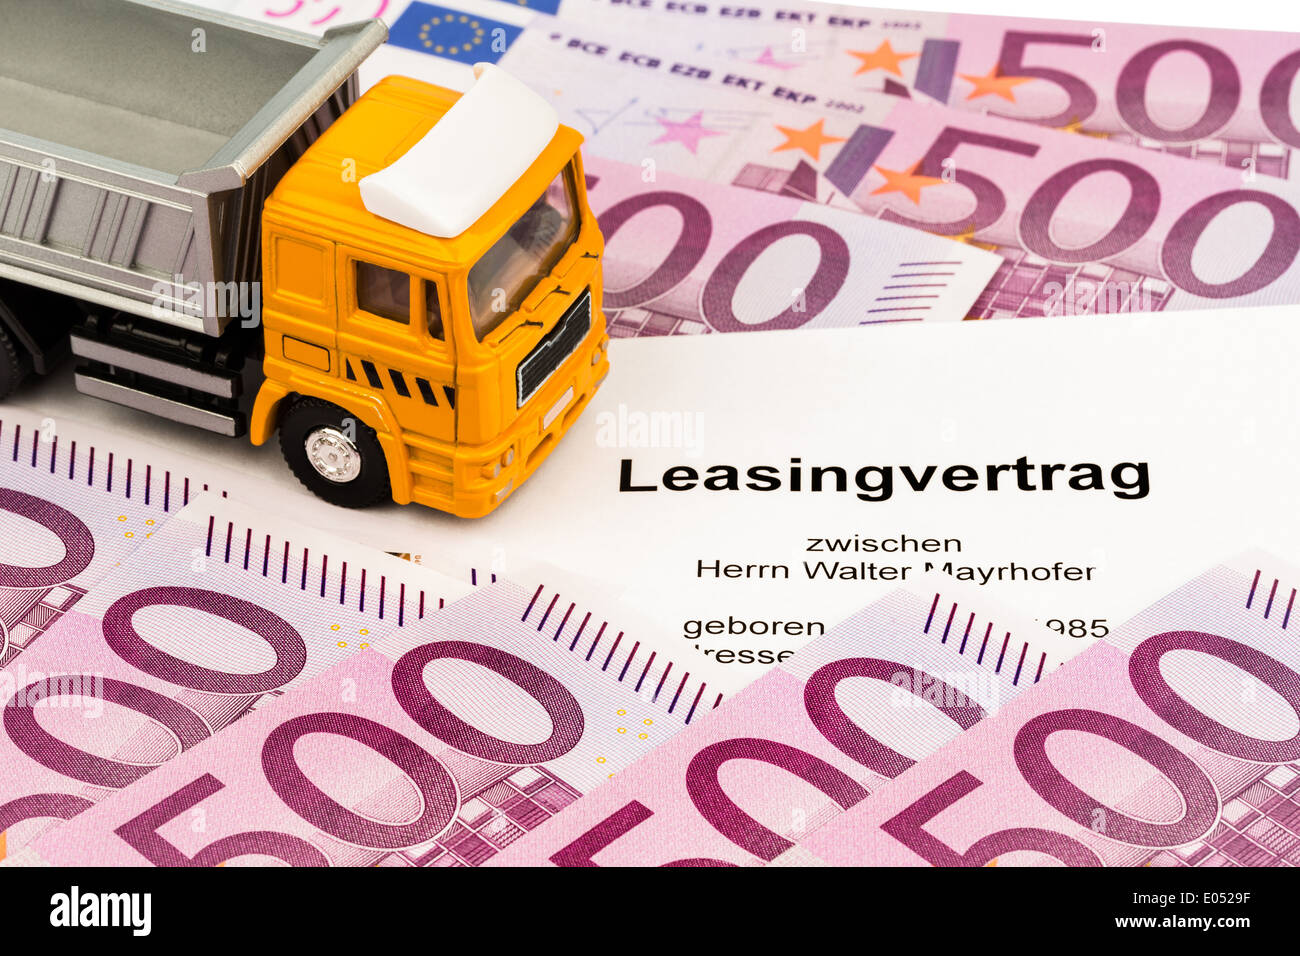 A leasing contract for new truck. Invest in new vehicles brings cost advantages., Ein Leasingvertrag fuer neuen Lastwagen. Inves Stock Photo